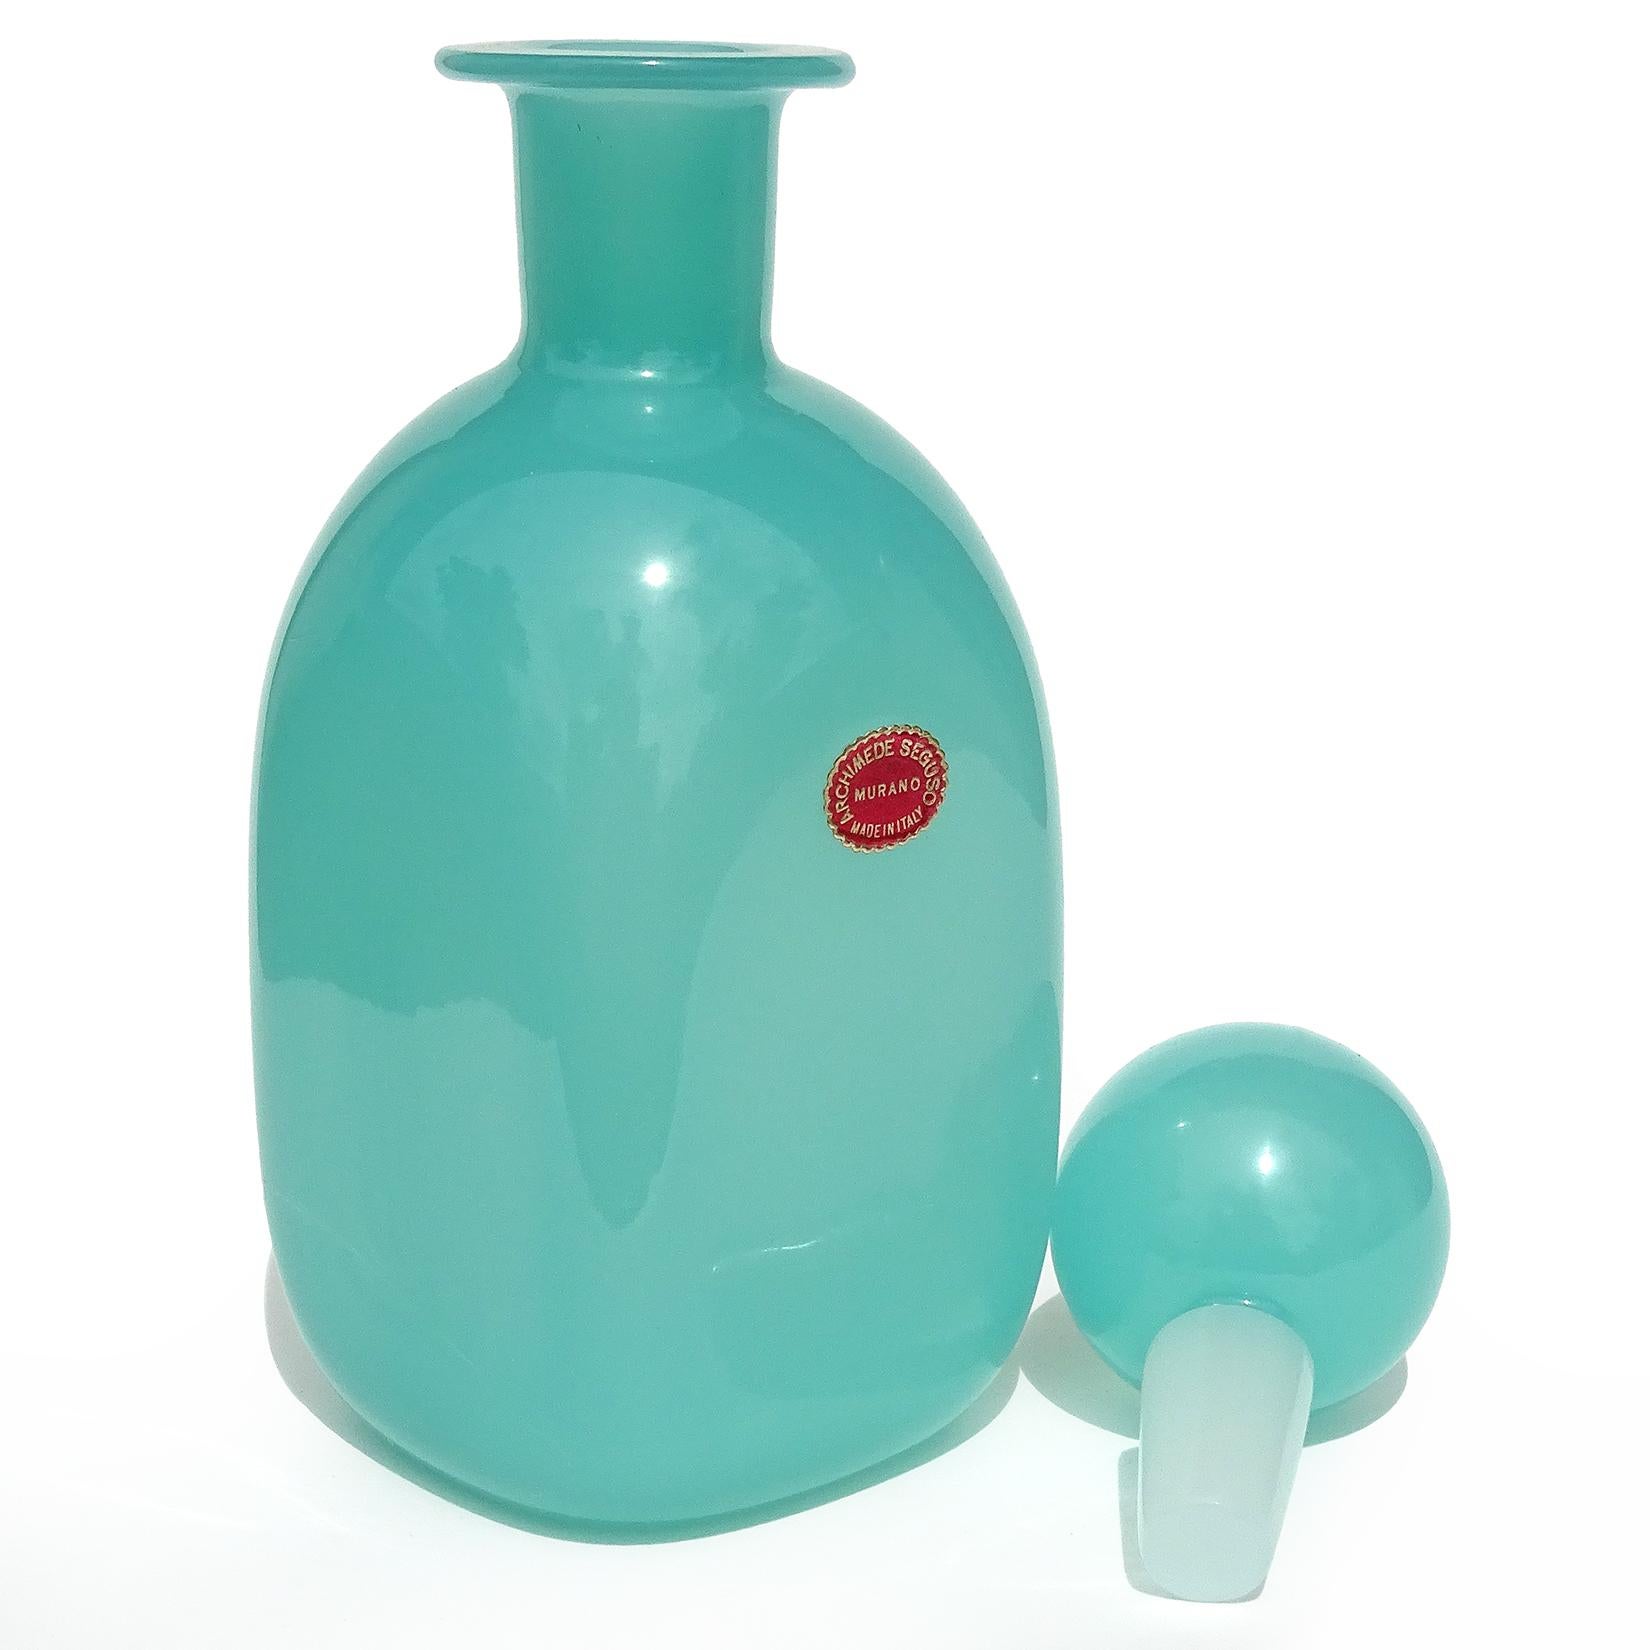 Beautiful vintage Murano hand blown opalescent Tiffany / teal blue Italian art glass decanter bottle, with original stopper. Documented to designer Archimede Seguso. It has 3 original labels still attached, including an 